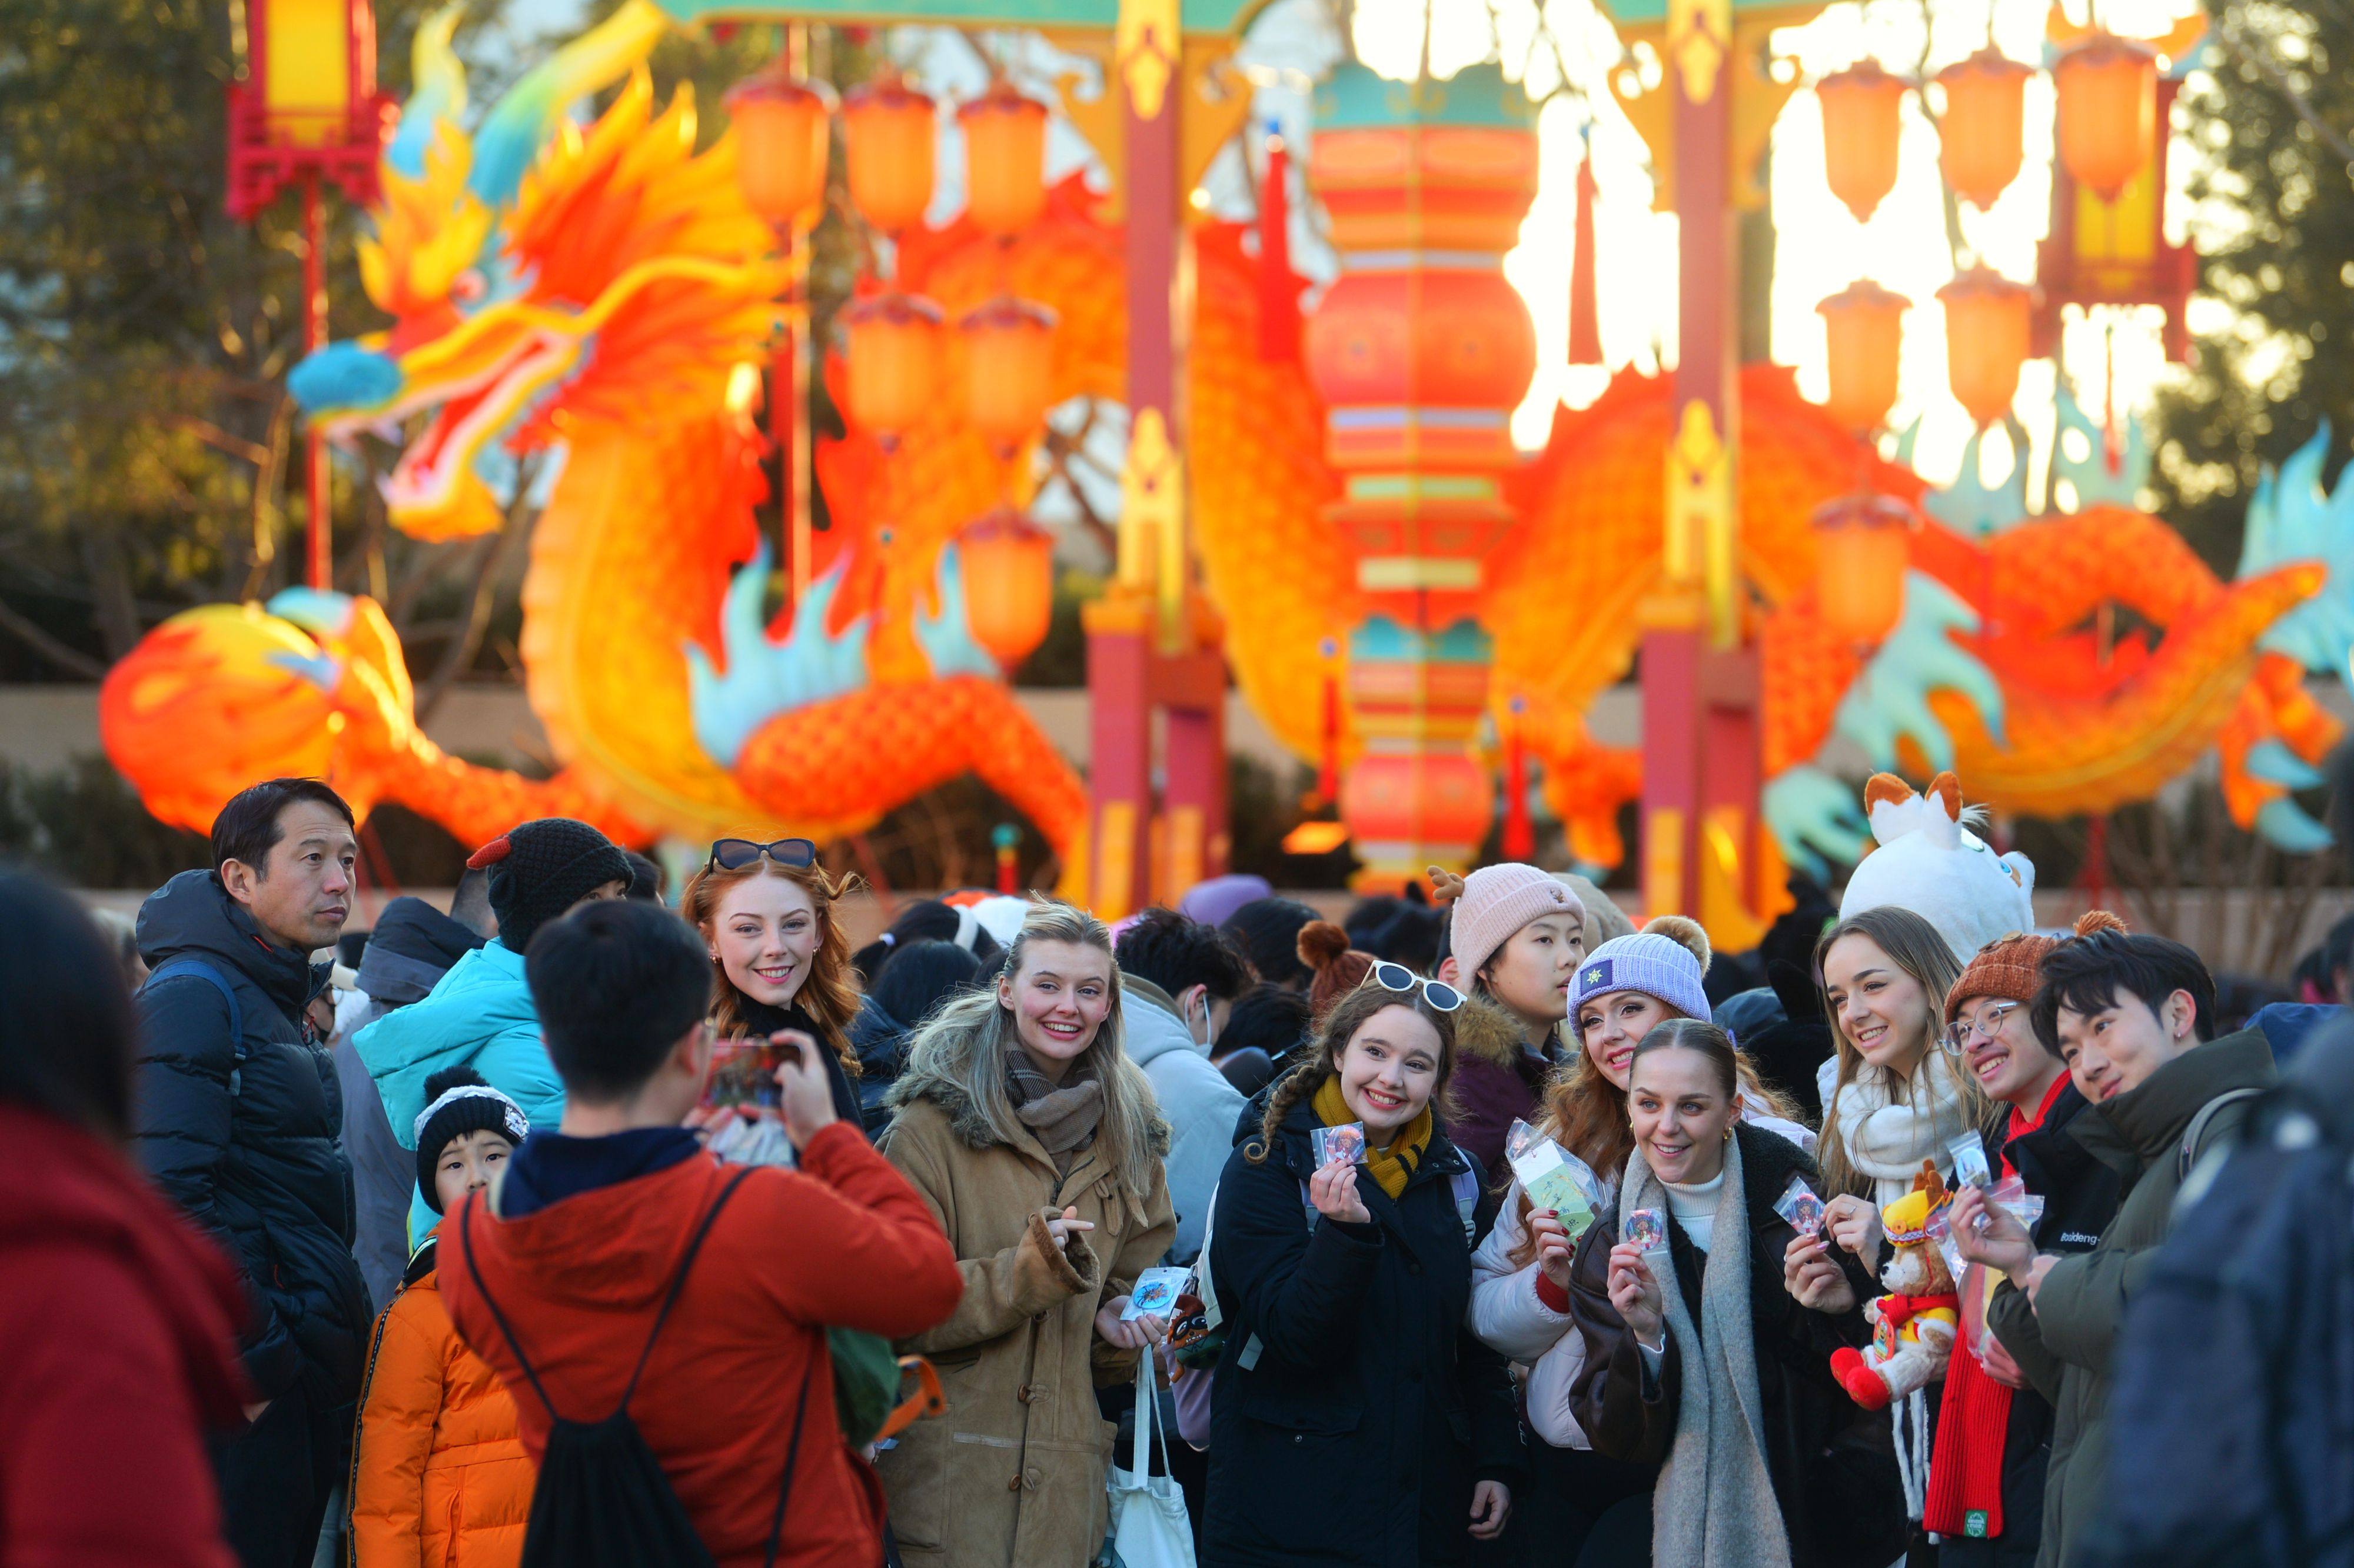 Fewer international students are choosing China as a destination since Covid-19 border closures were lifted early last year. Photo: Getty Images